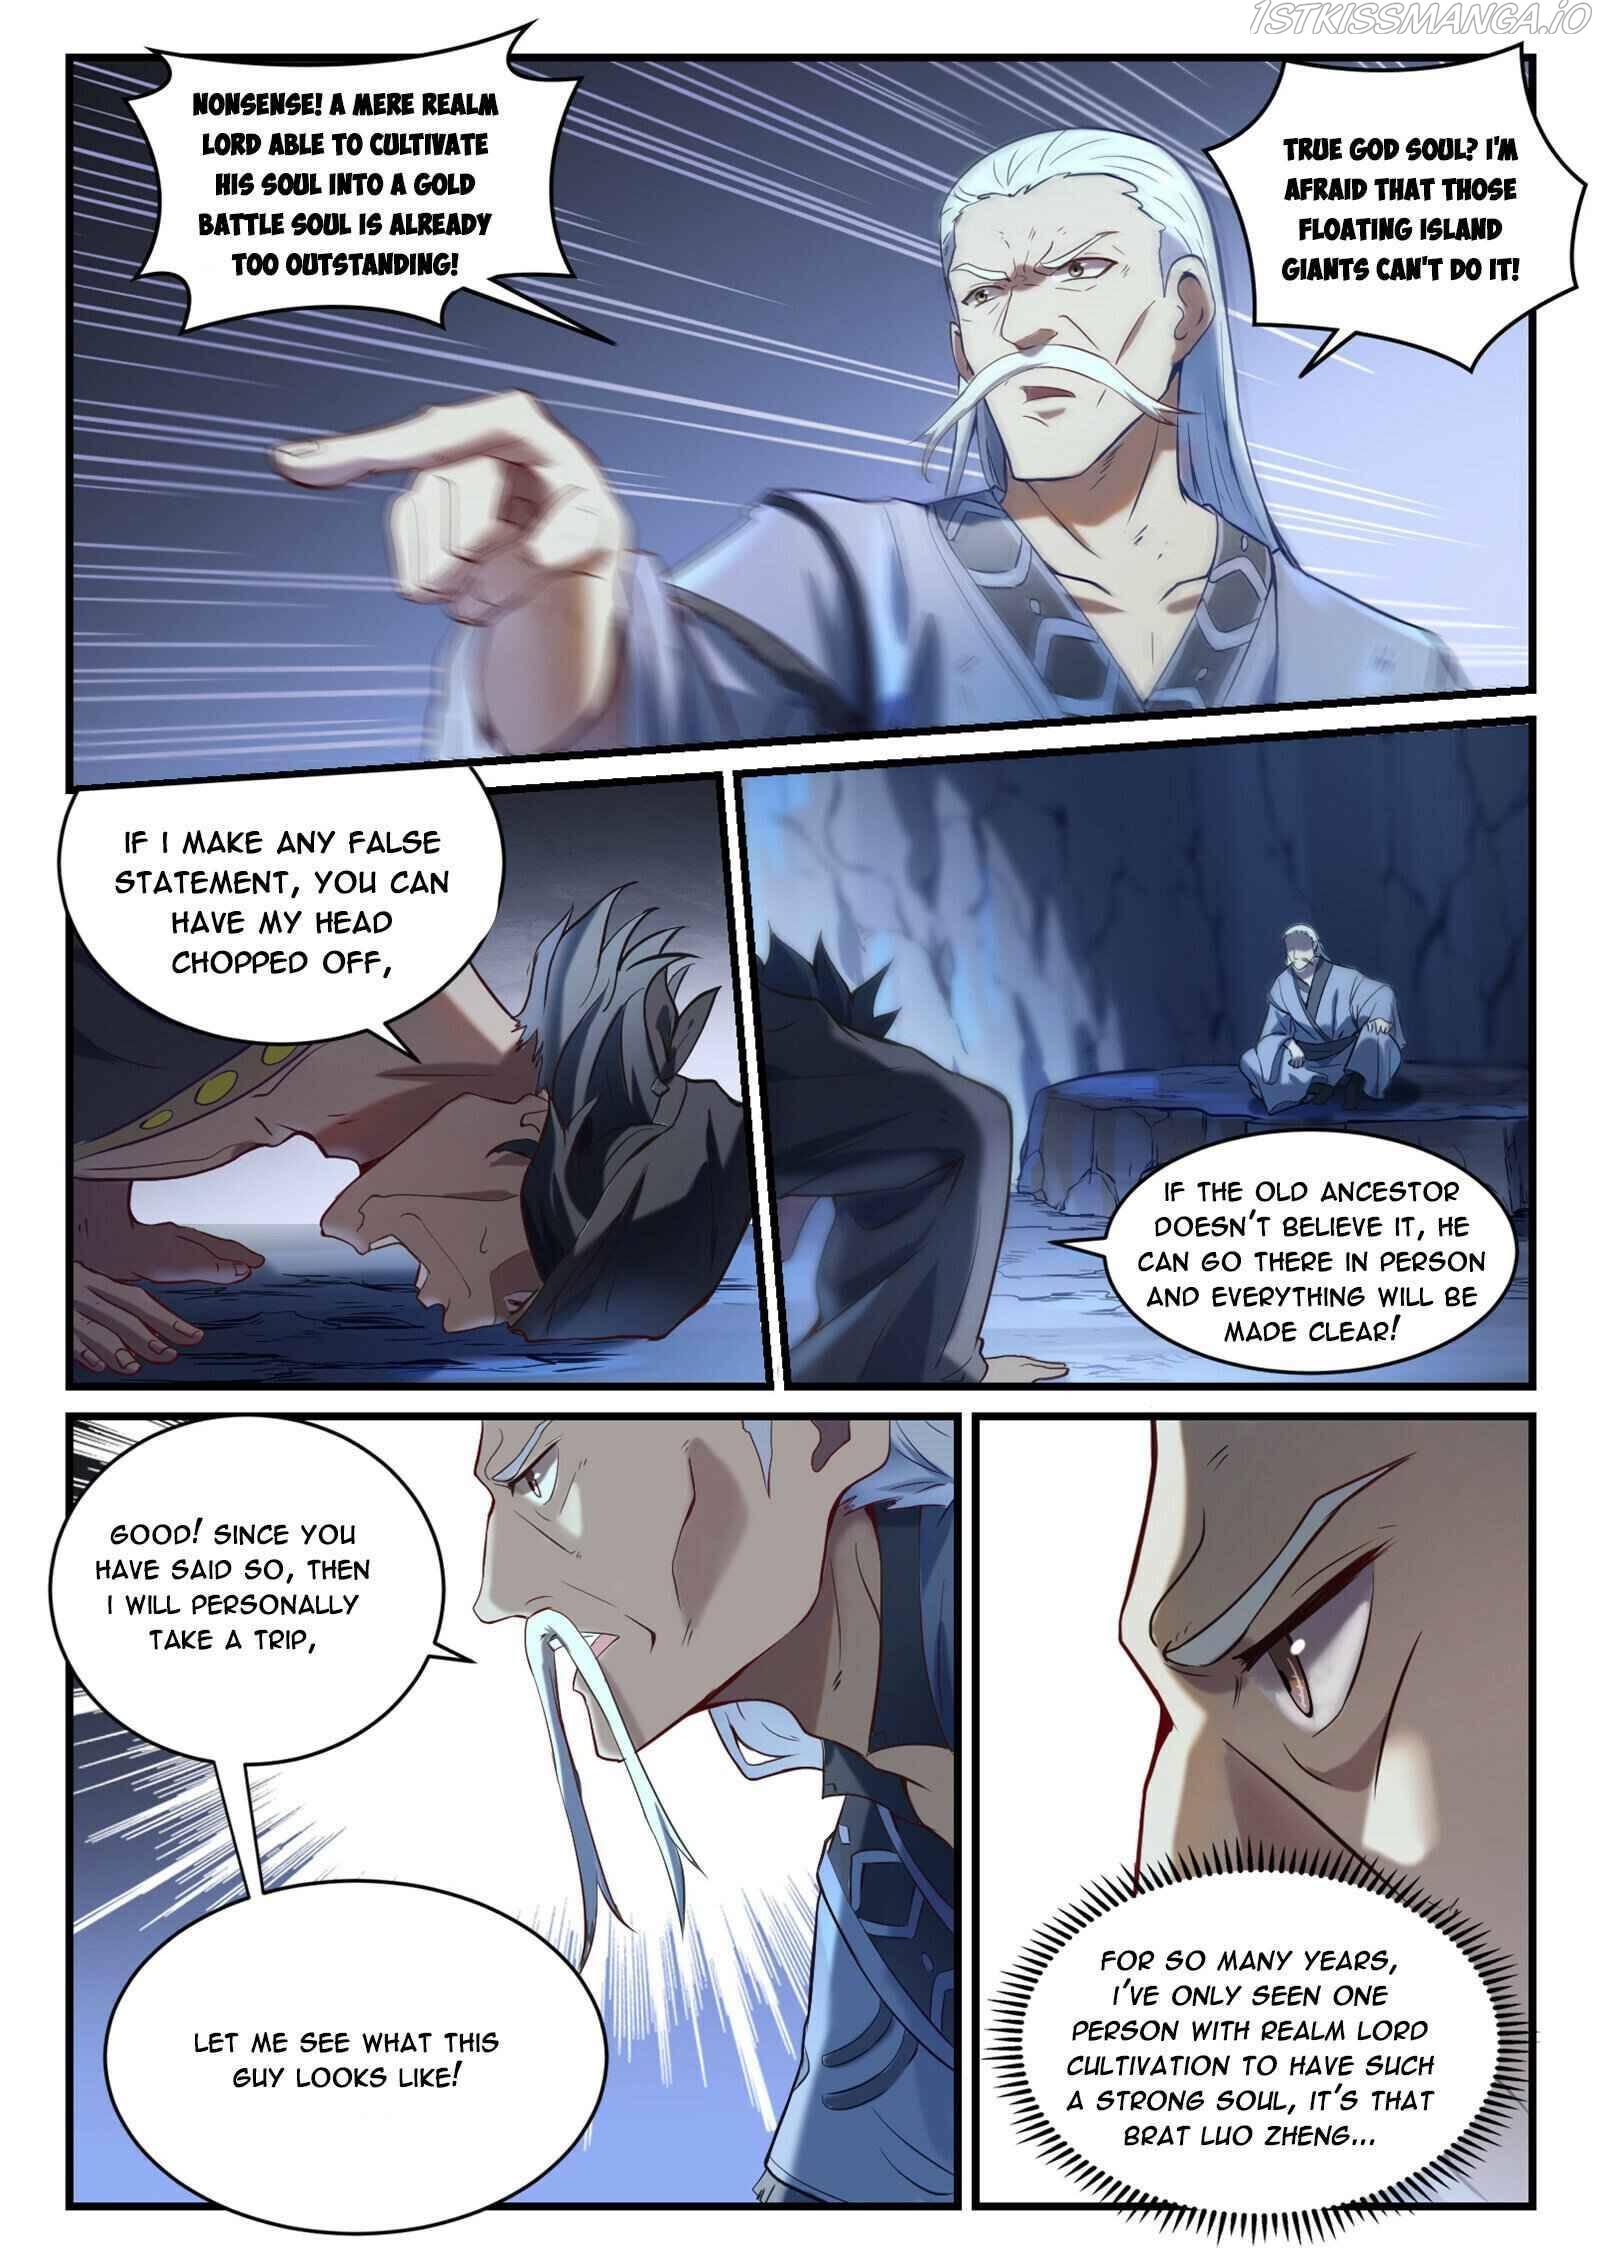 Apotheosis Chapter 846 - Page 5